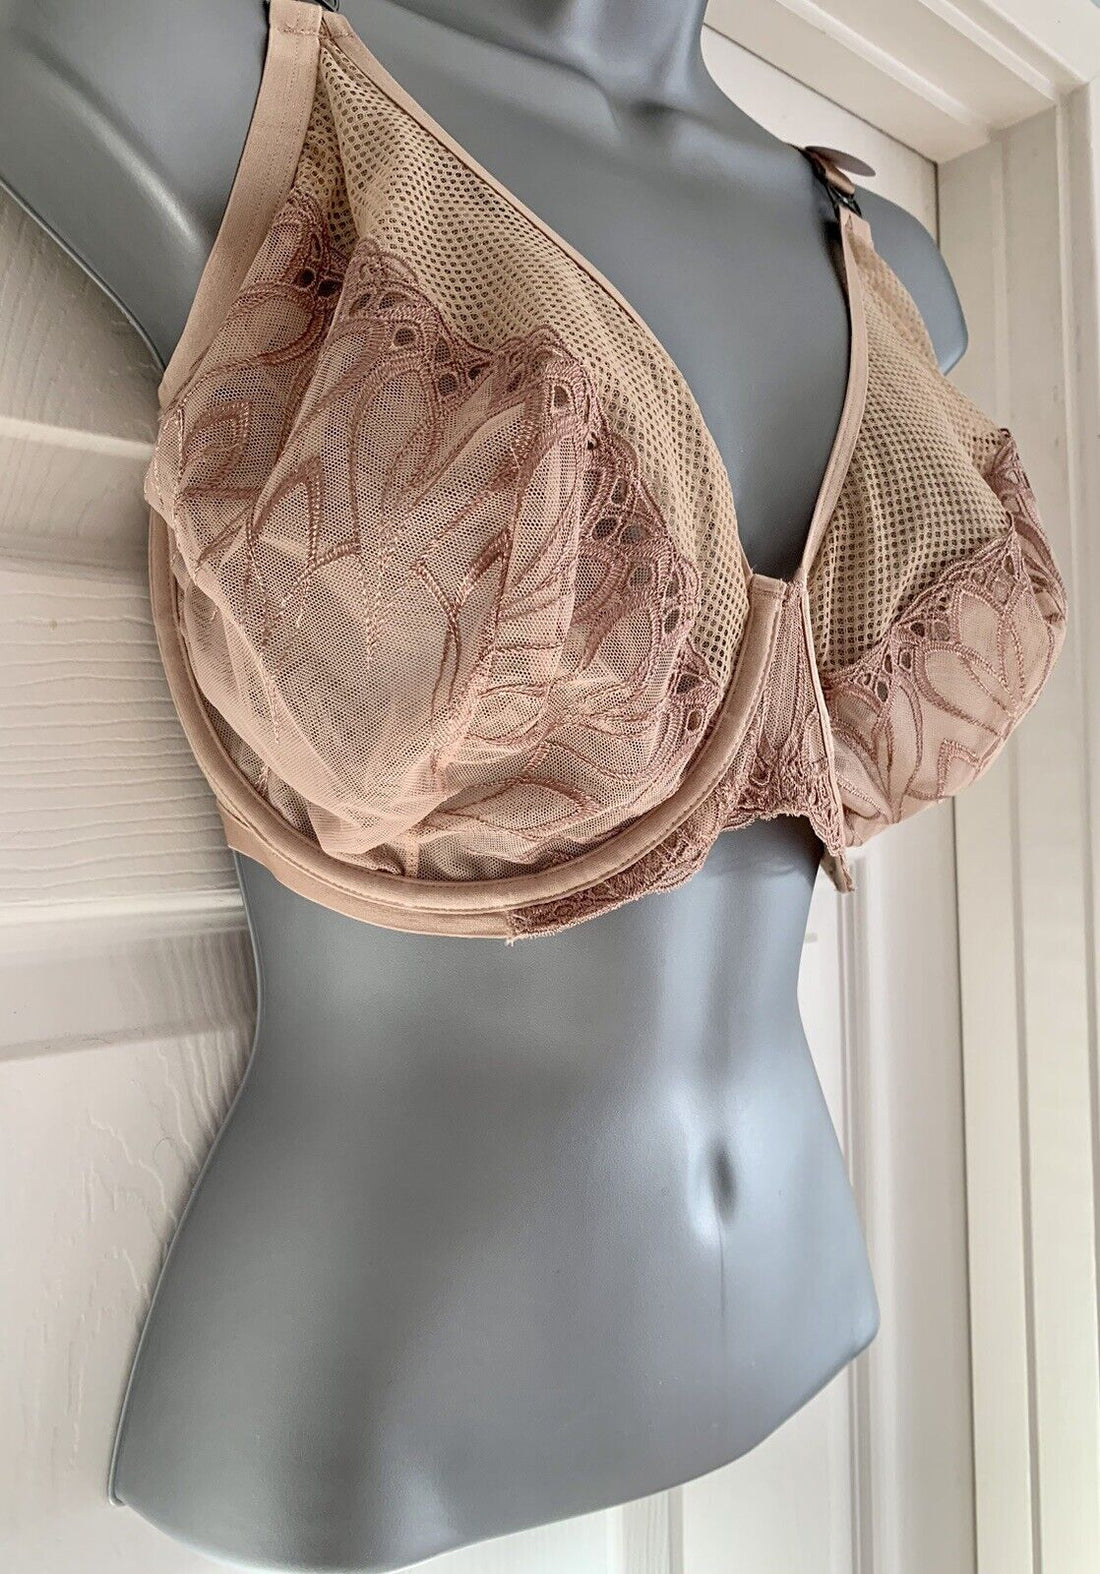 EX M*S Nude Nouveau Embroidered Underwired Plunge Bra in Size 38GG RRP £25